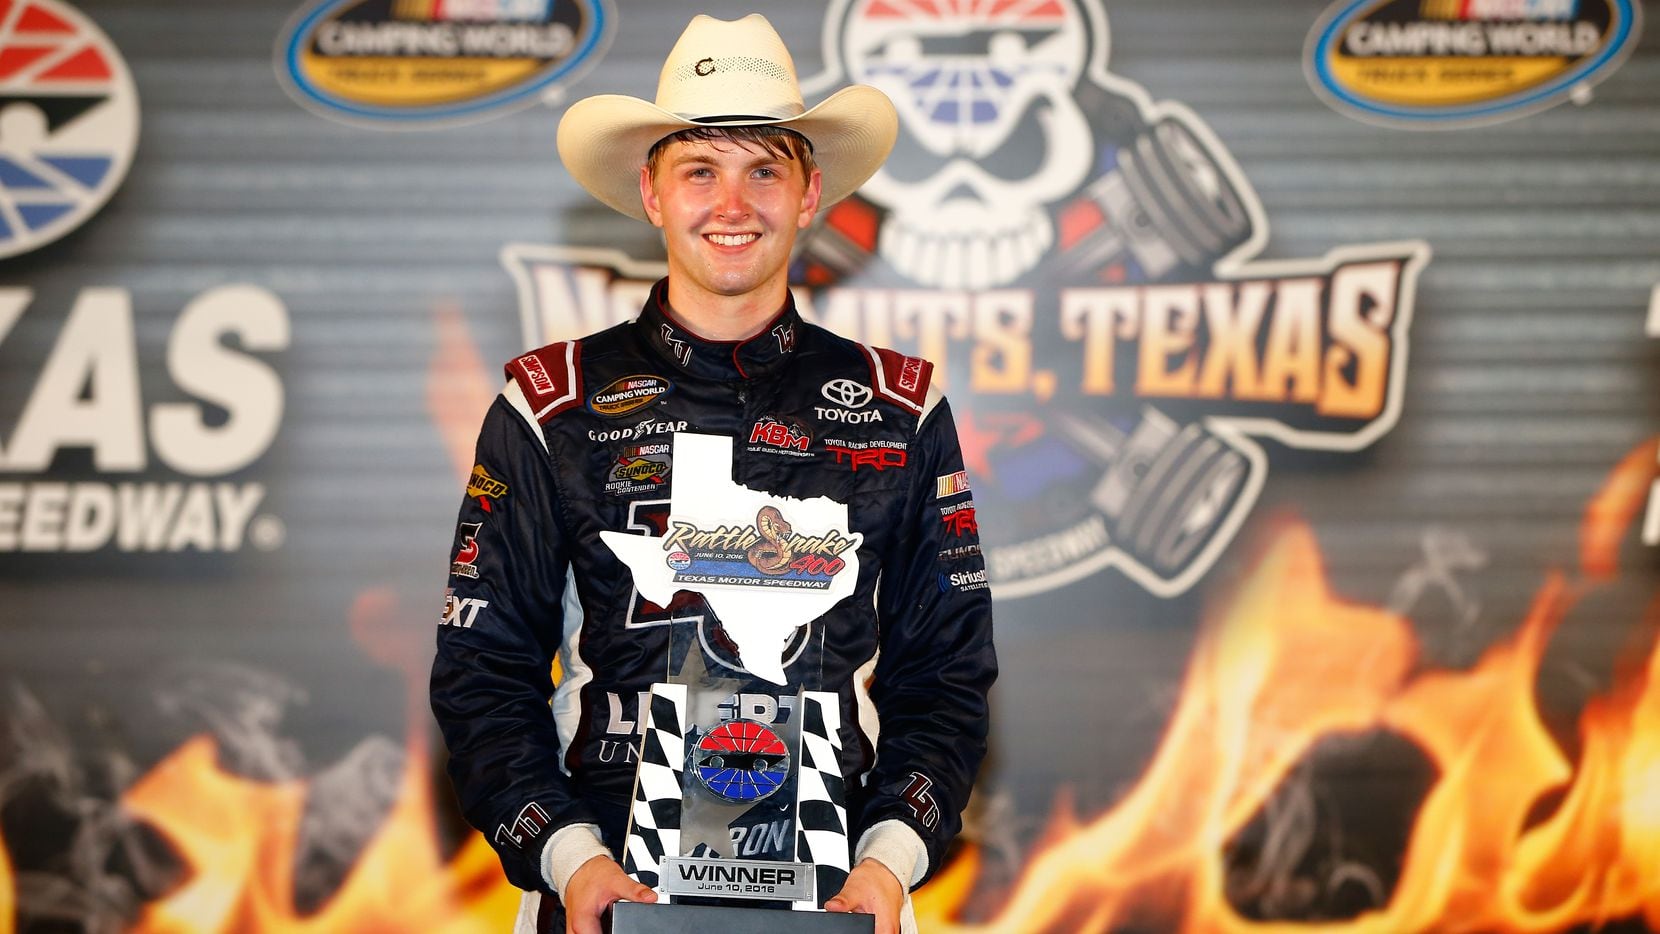 FORT WORTH, TX - JUNE 10:  William Byron, driver of the #9 Liberty University Toyota, celebrates in victory lane after winning  the NASCAR Camping World Truck Series Rattlesnake 400 at Texas Motor Speedway on June 10, 2016 in Fort Worth, Texas.  (Photo by Jonathan Ferrey/Getty Images for Texas Motor Speedway)